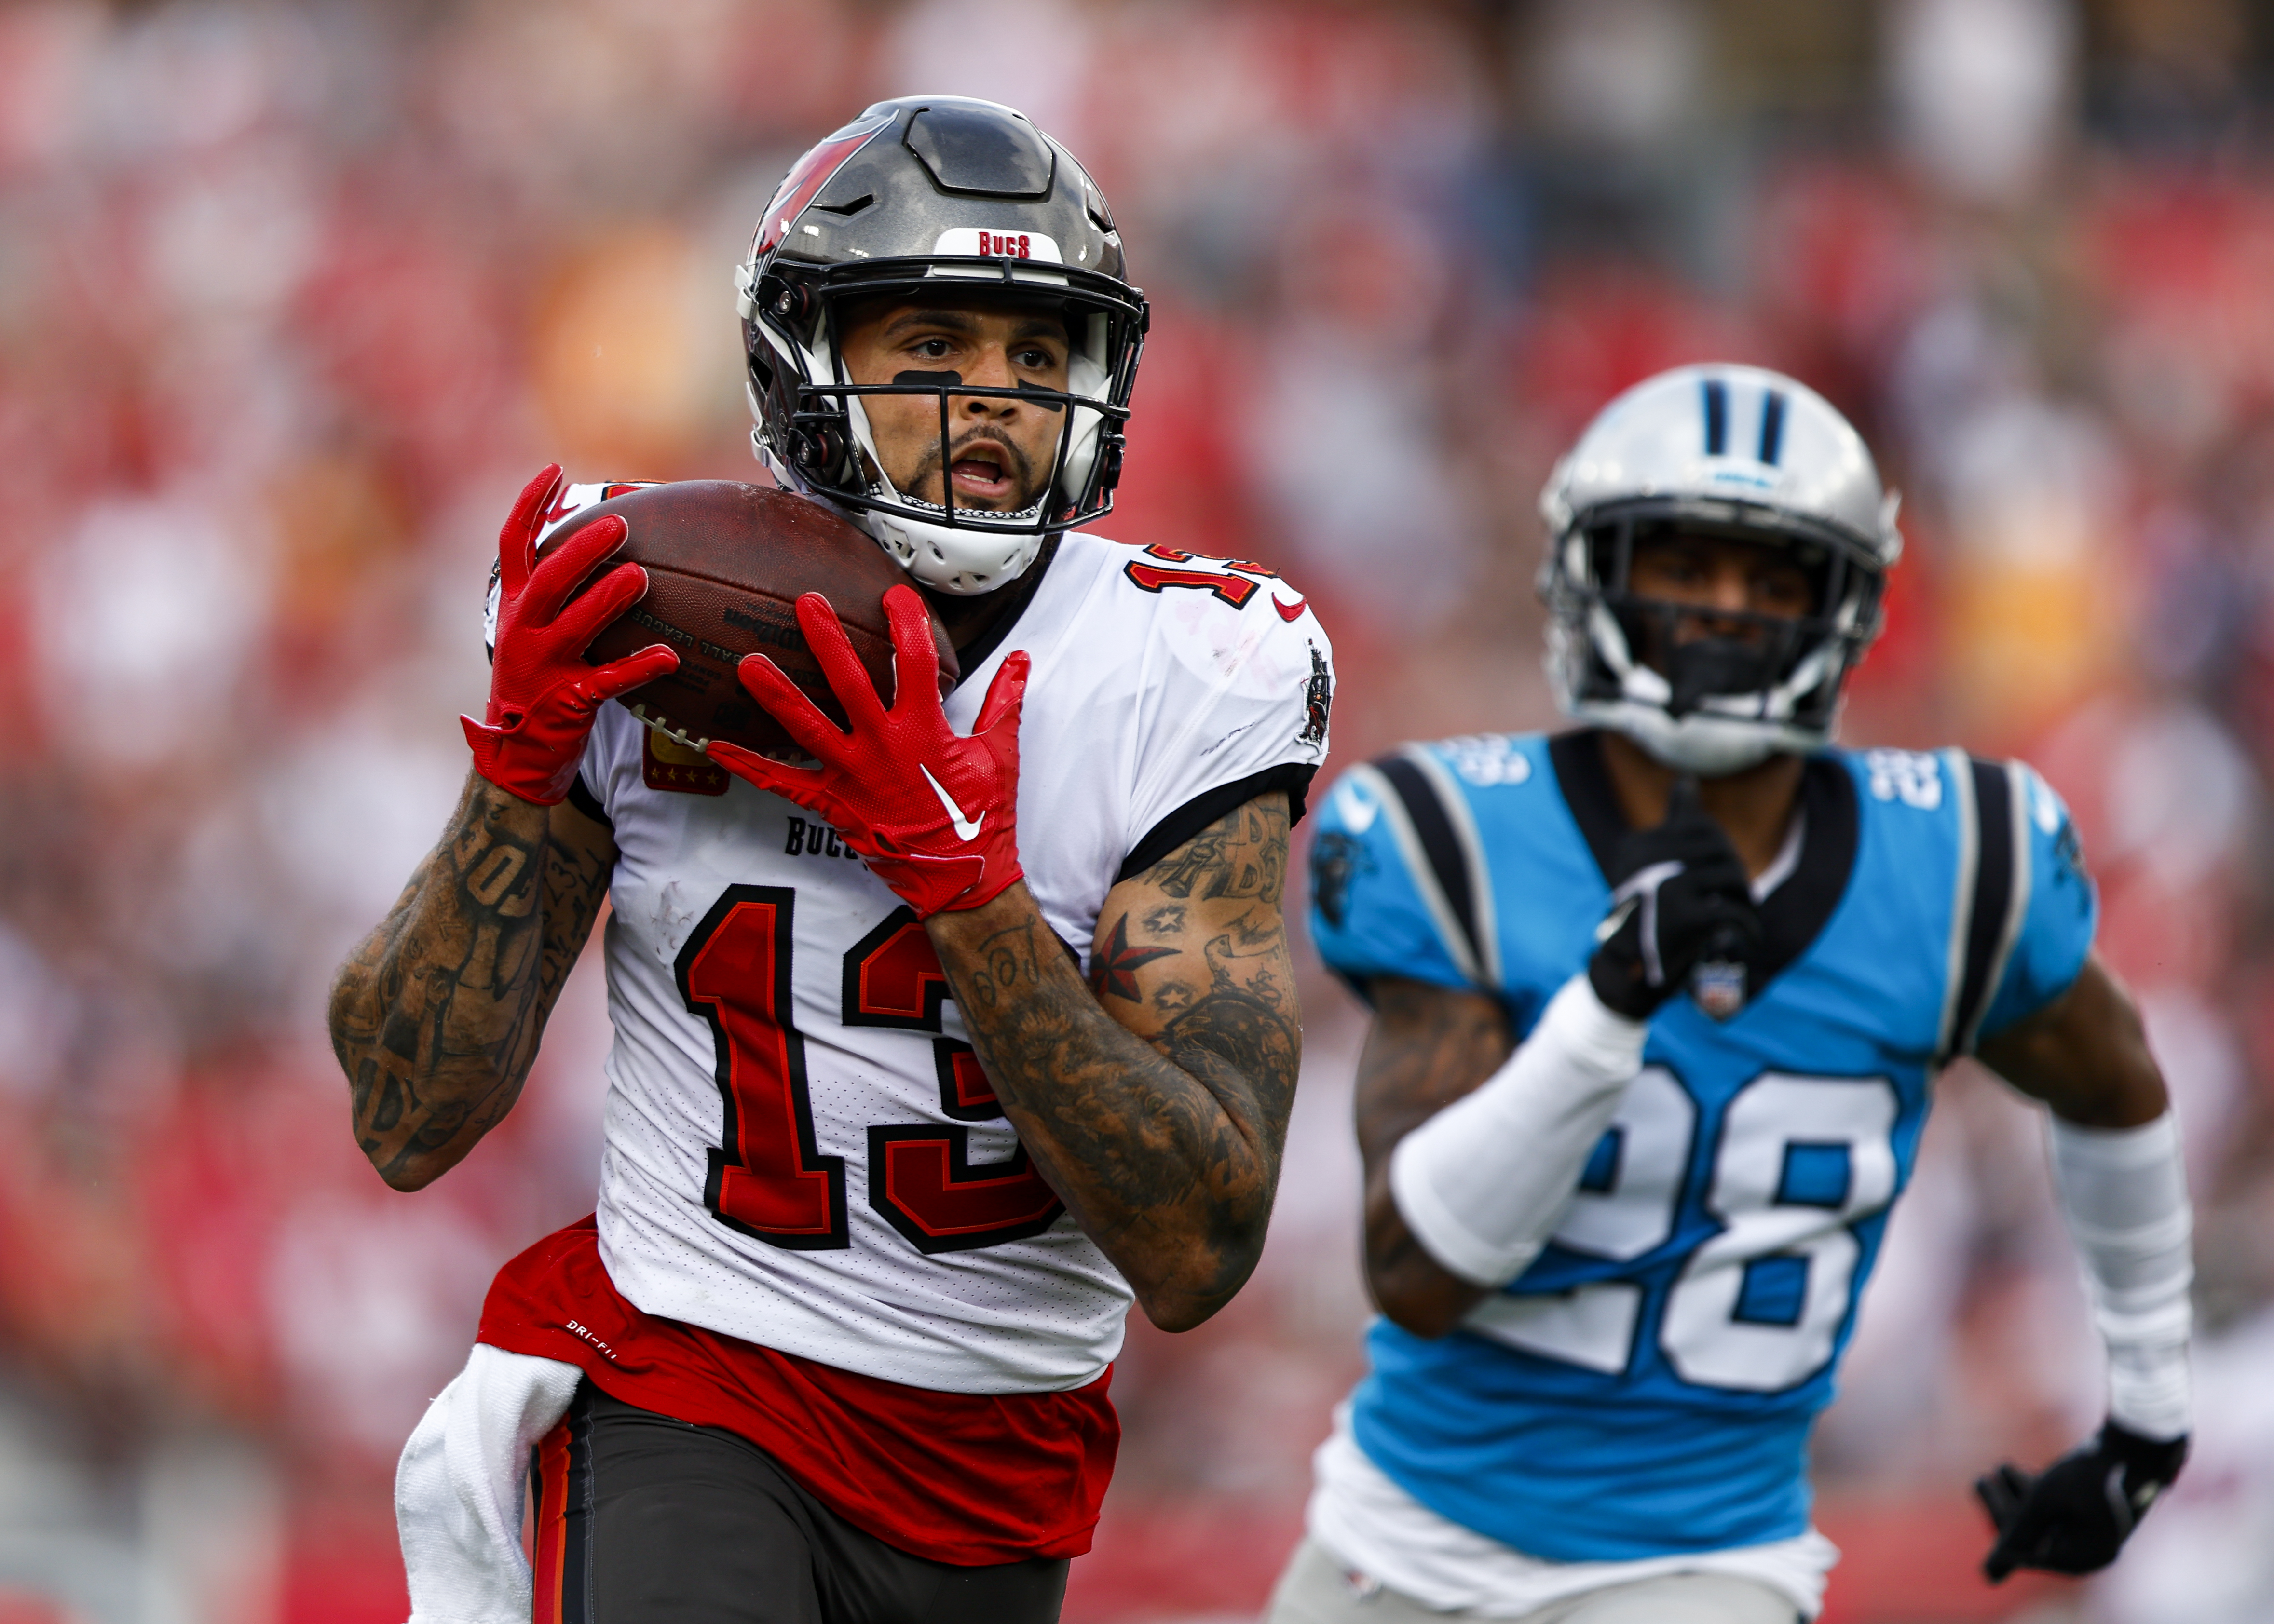 Wide Receiver Mike Evans (L) of the Tampa Bay Buccaneers catches the ball to score a touchdown against the Carolina Panthers at the Raymond James Stadium in Tampa, Florida, January 1, 2023. CFP